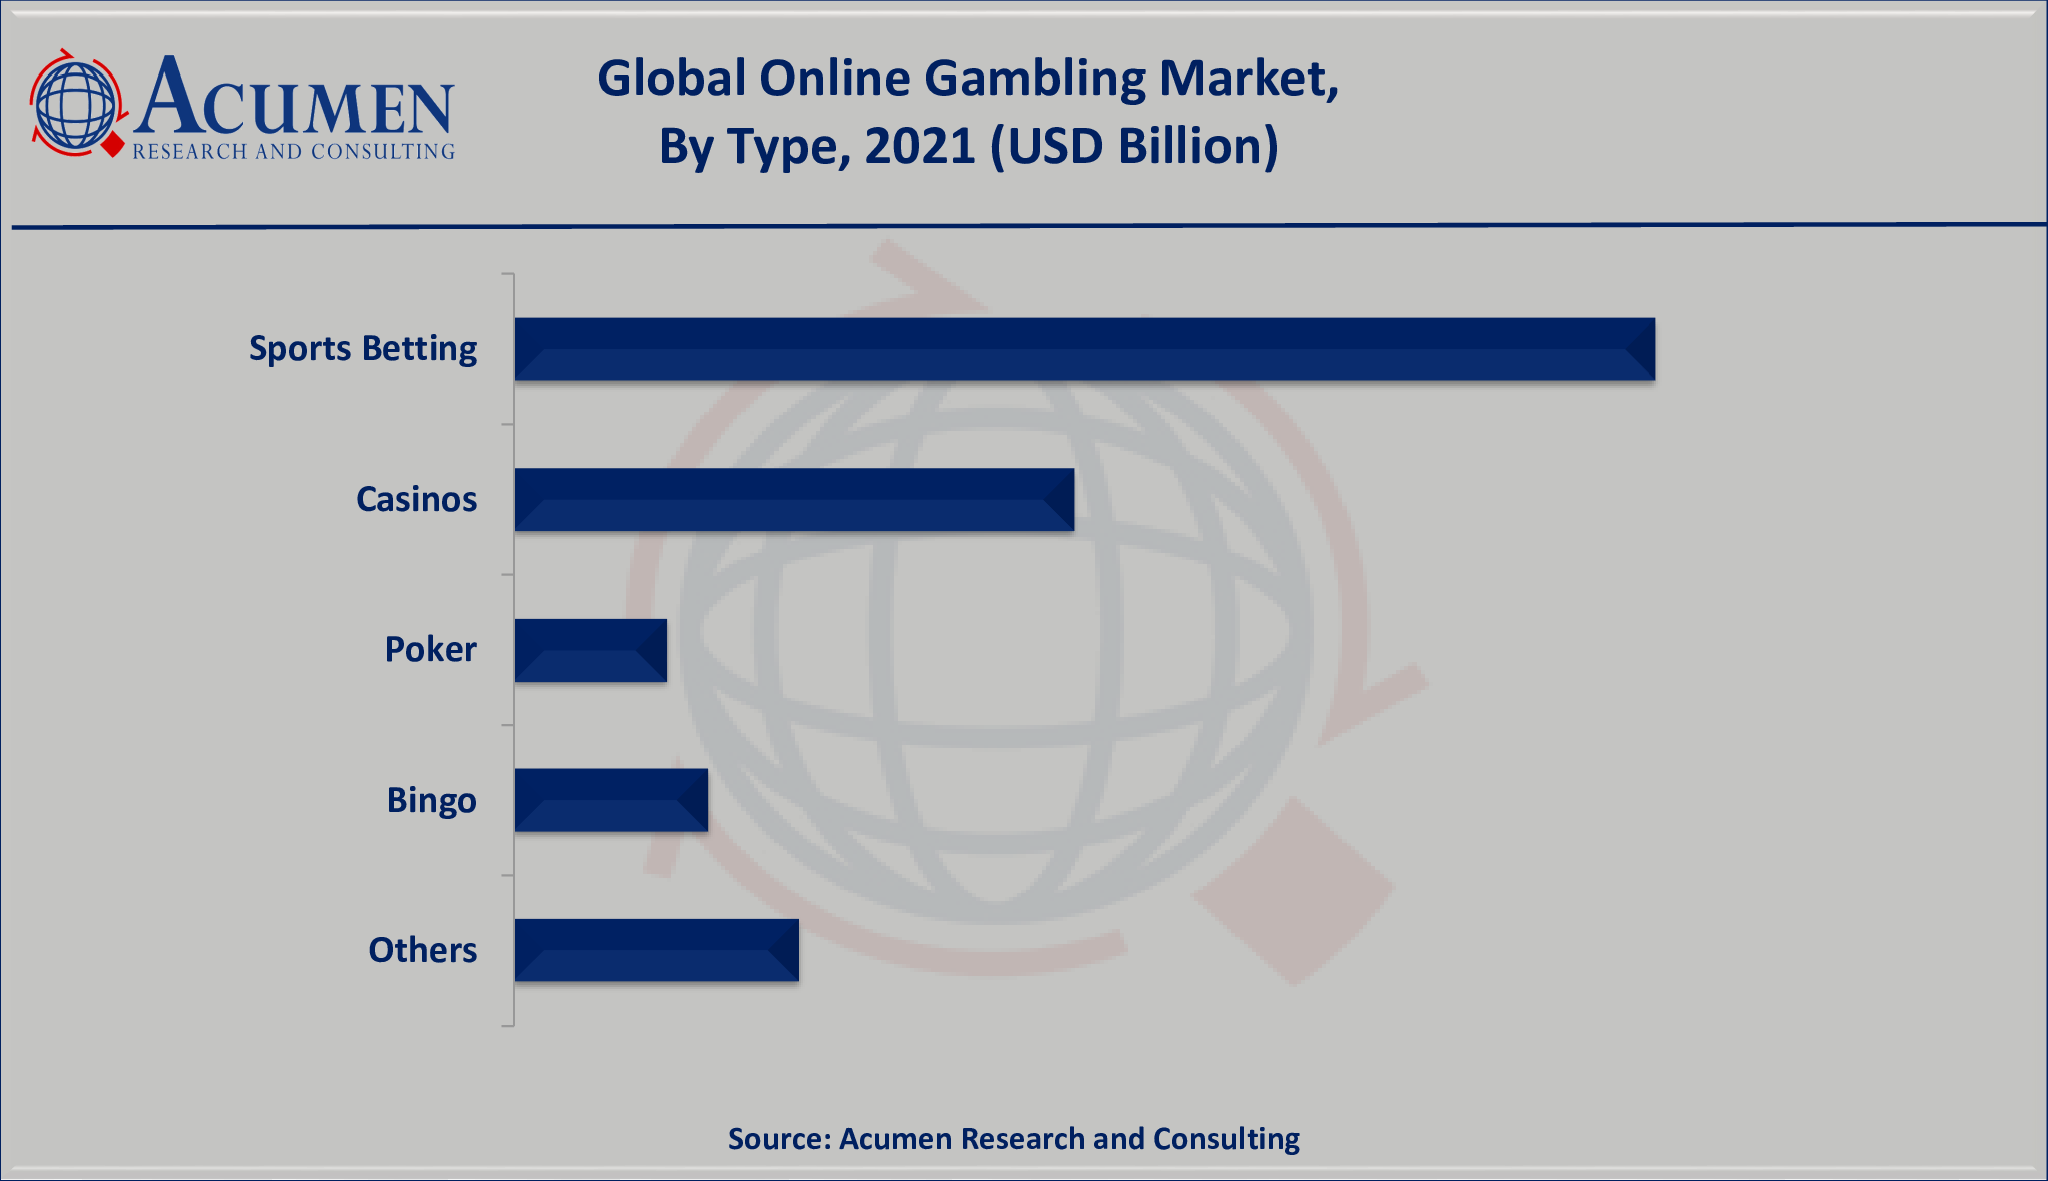 Gambling Market Share accounted for USD 492 billion in 2021 and is projected to reach a market size of USD 804 billion by 2030; growing at a CAGR of 5.7%.